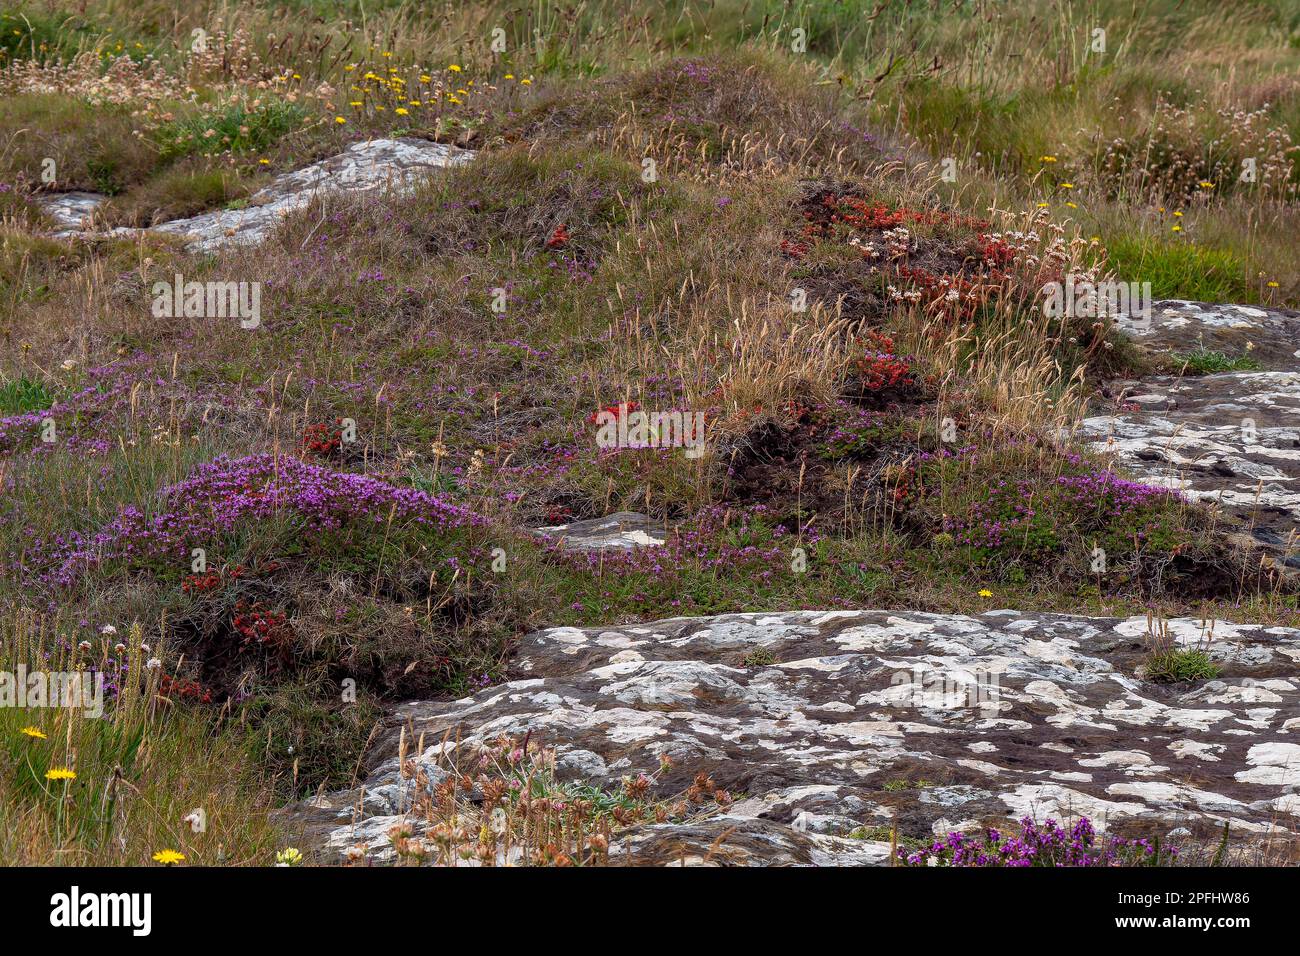 Colorful flowers on stony soil, picturesque landscape. Beautiful plants common in southern Ireland. Northern European vegetation. Stock Photo